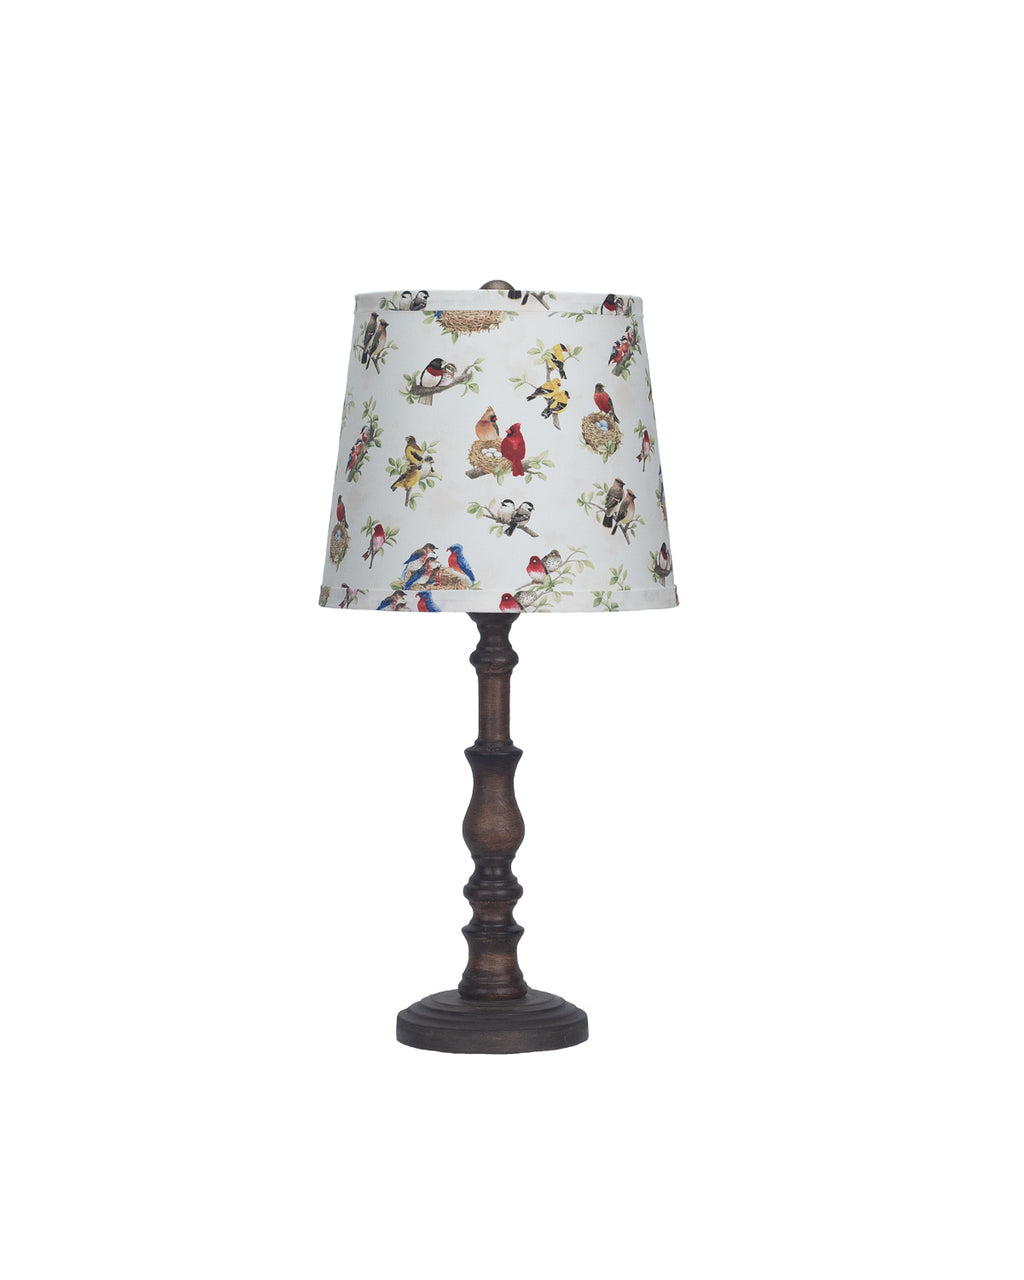 Distressed Brown Traditional Table Lamp With Birds Printed Shade - 99fab 